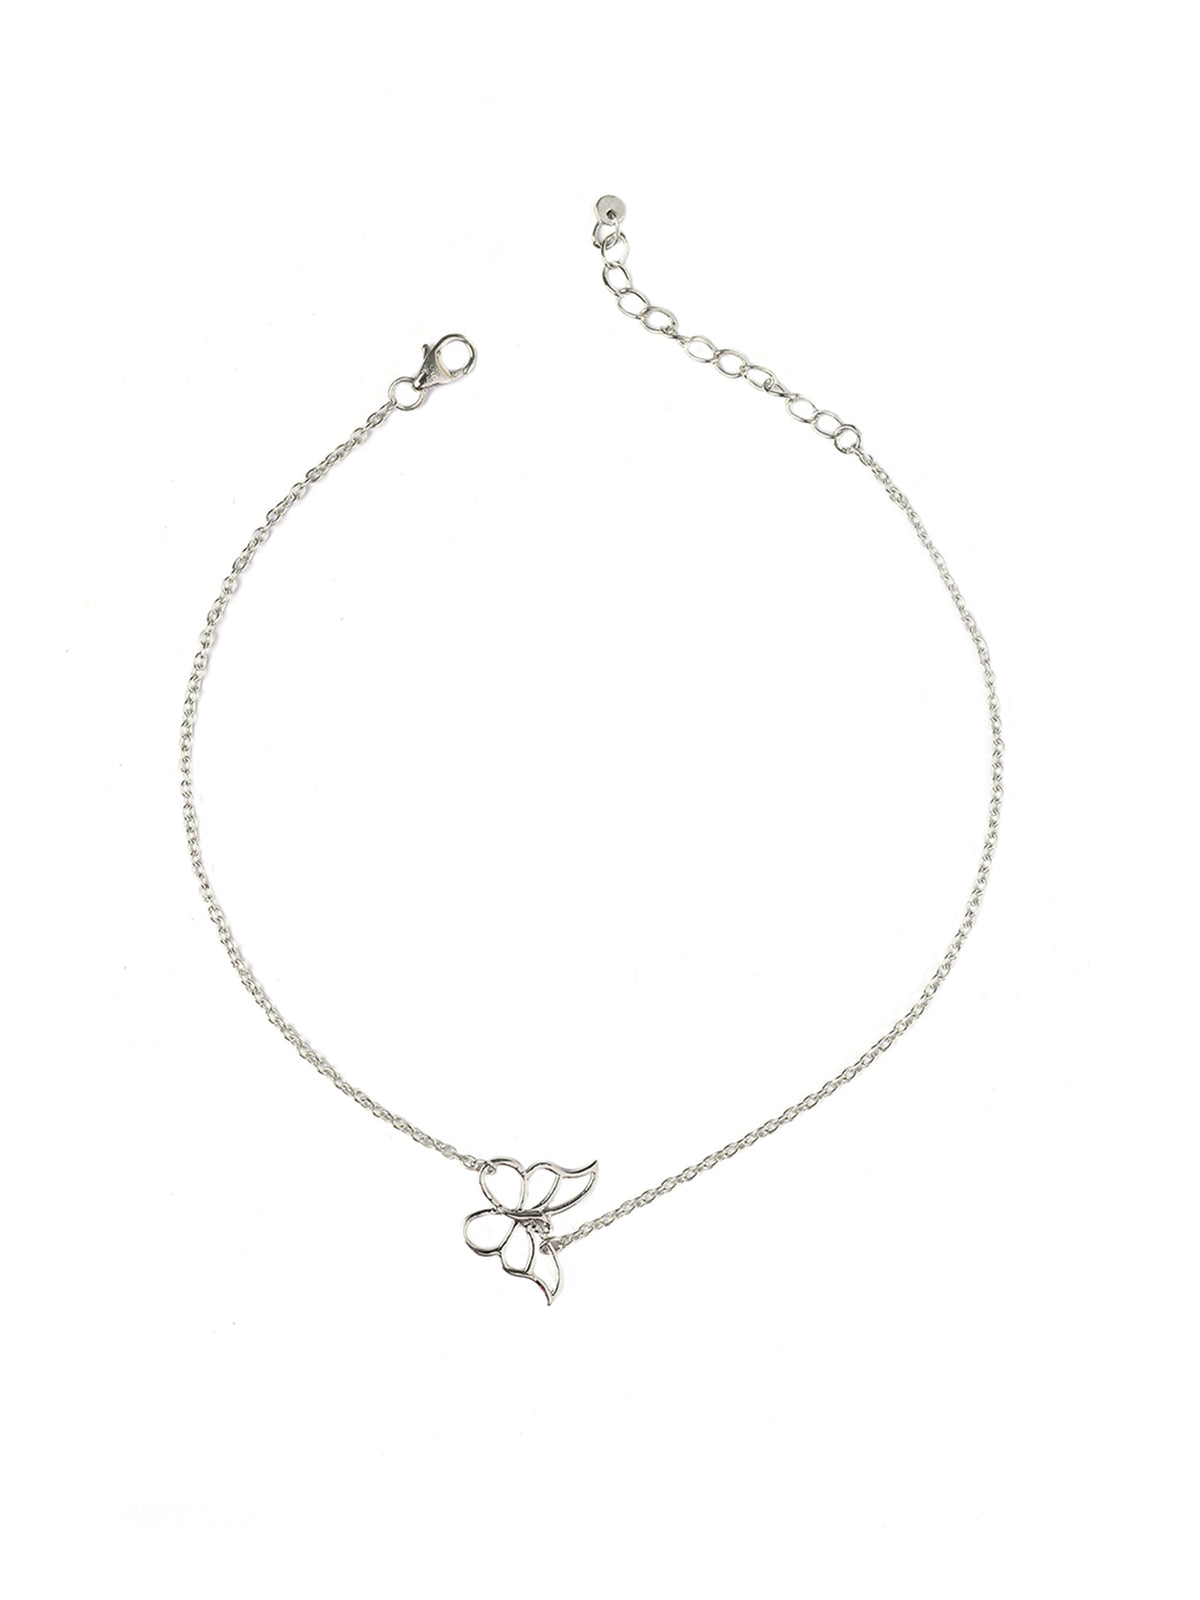 SINGLE BUTTERFLY ANKLET IN PURE STERLING SILVER FOR WOMEN